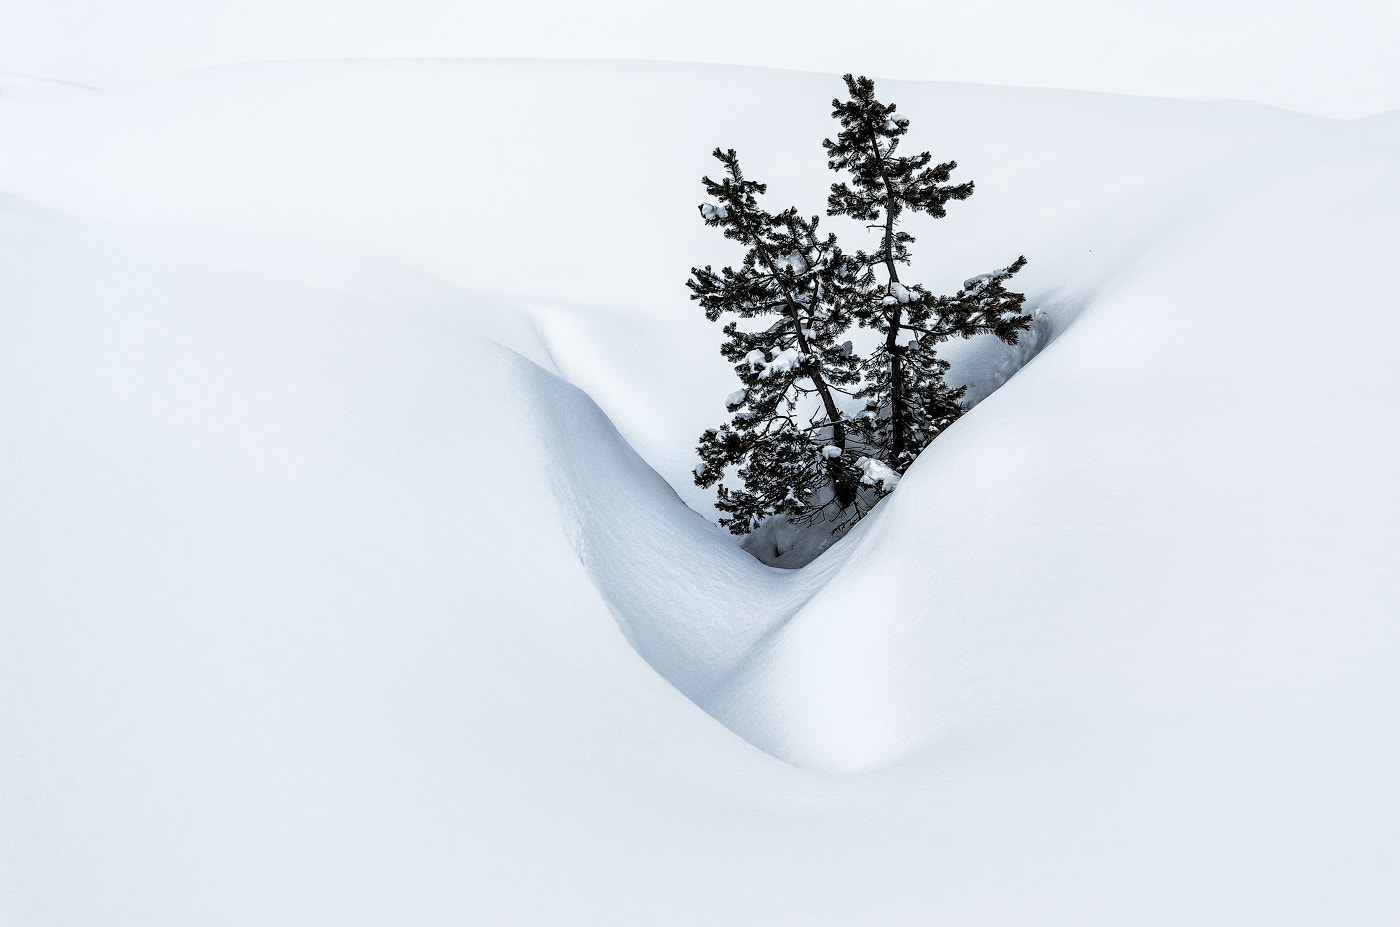 Pentax K-5 sample photo. Lost in the snow photography